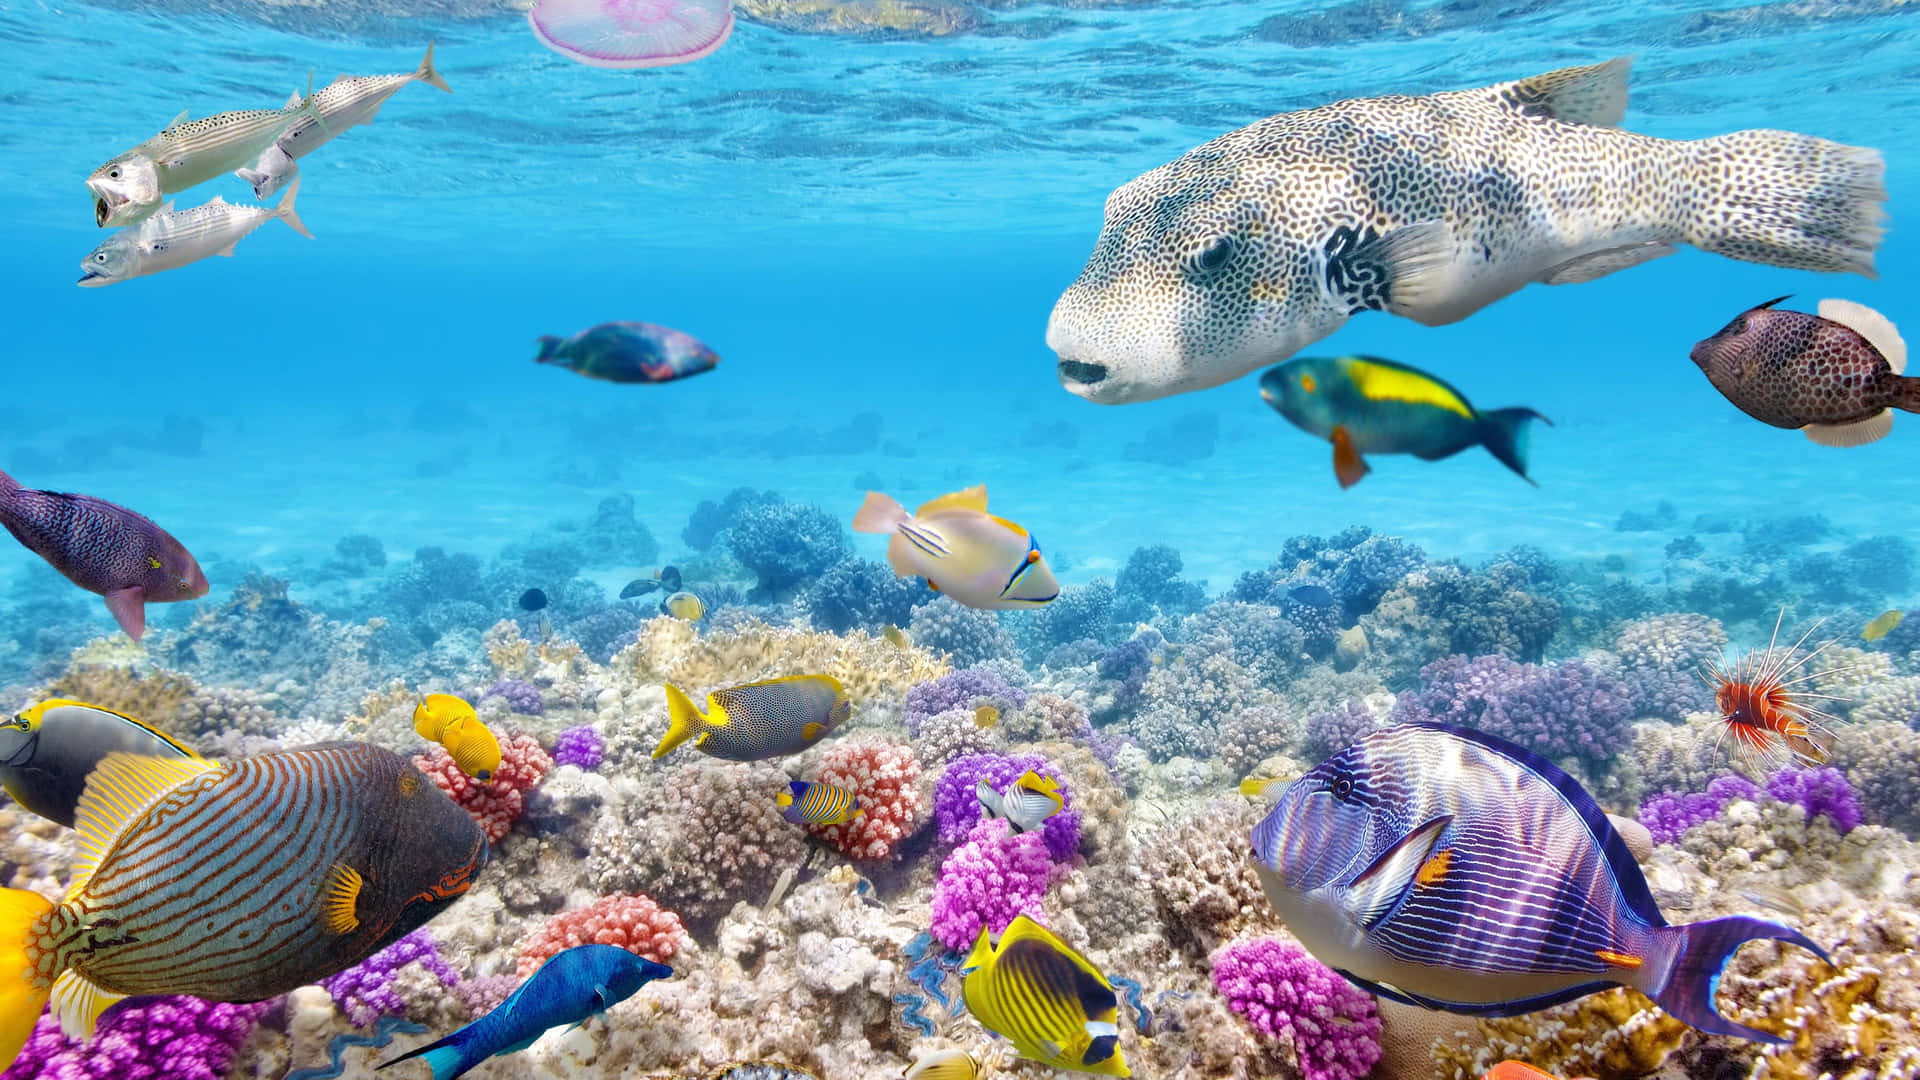 A vast array of life seen underwater in the beautiful coral reef.